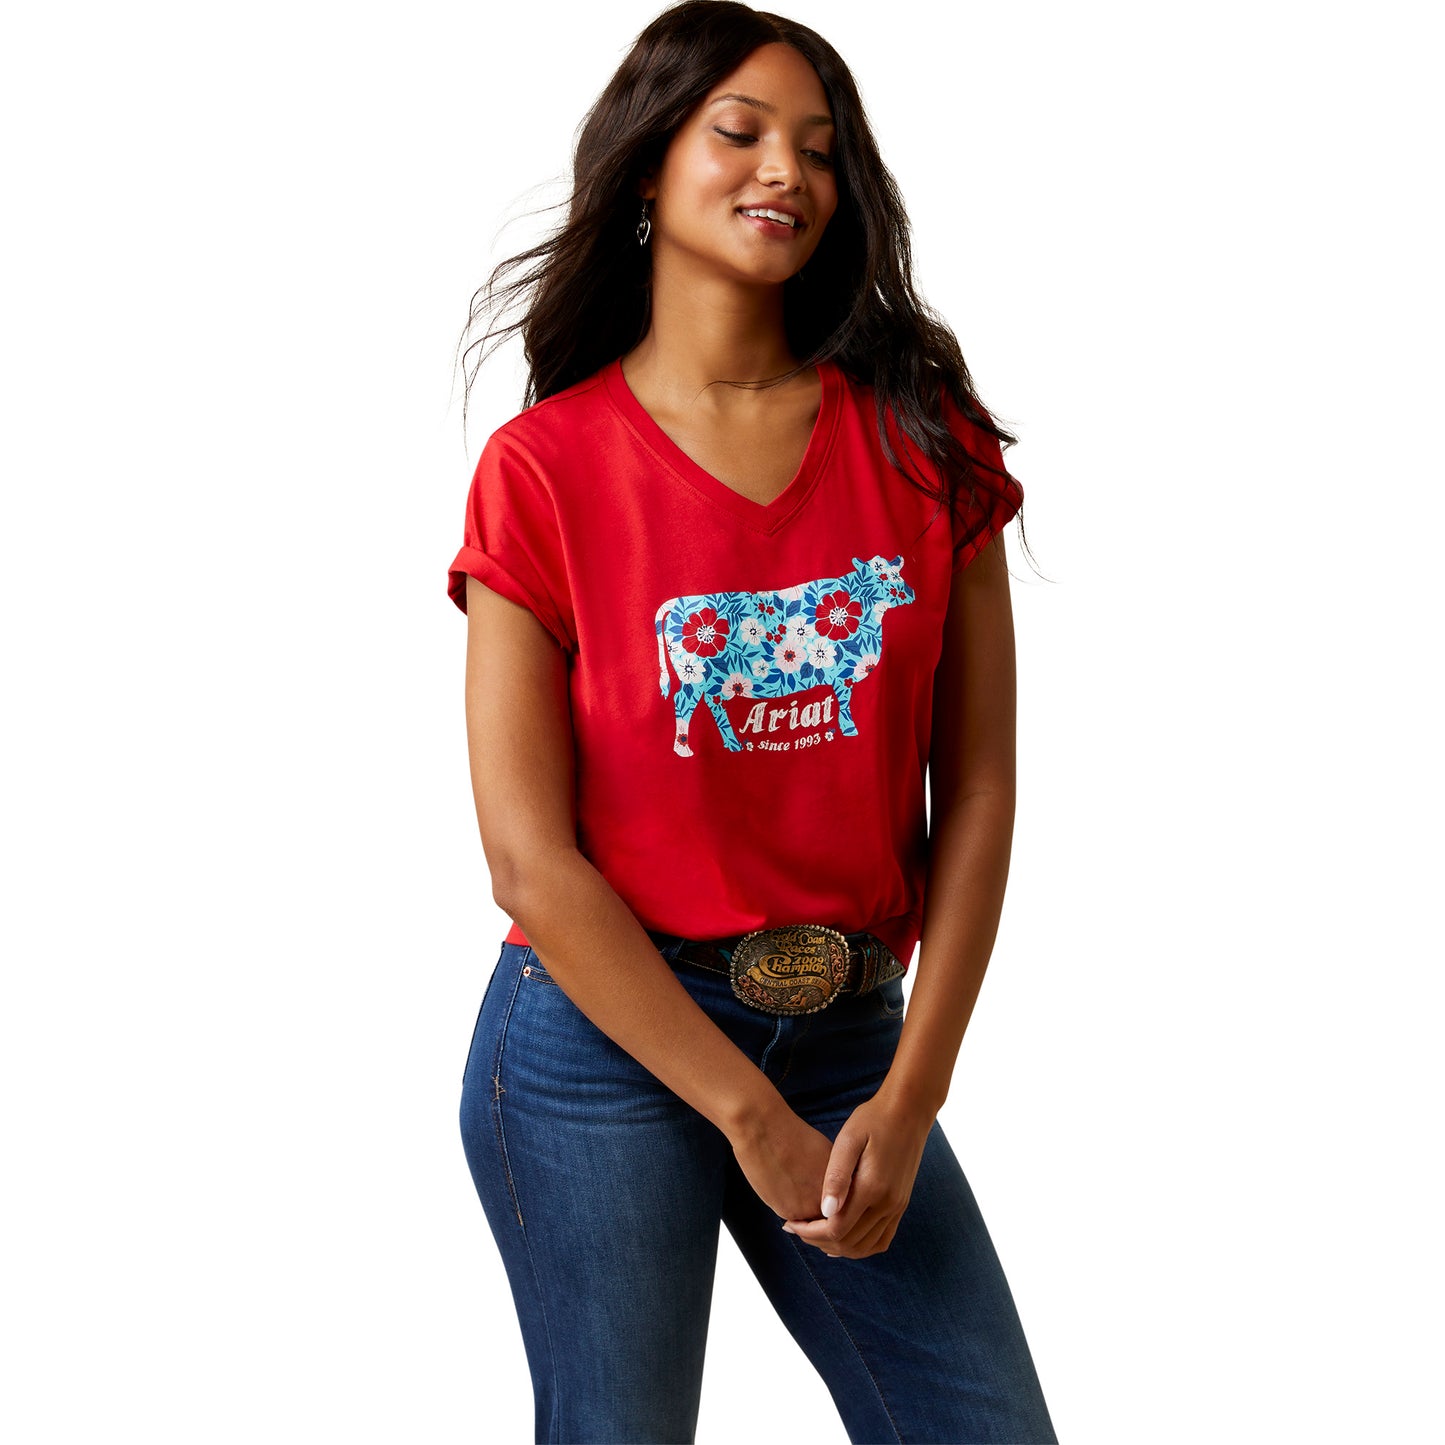 Ariat® Ladies Floral Cow Print Equestrian Red T-Shirt 10045086